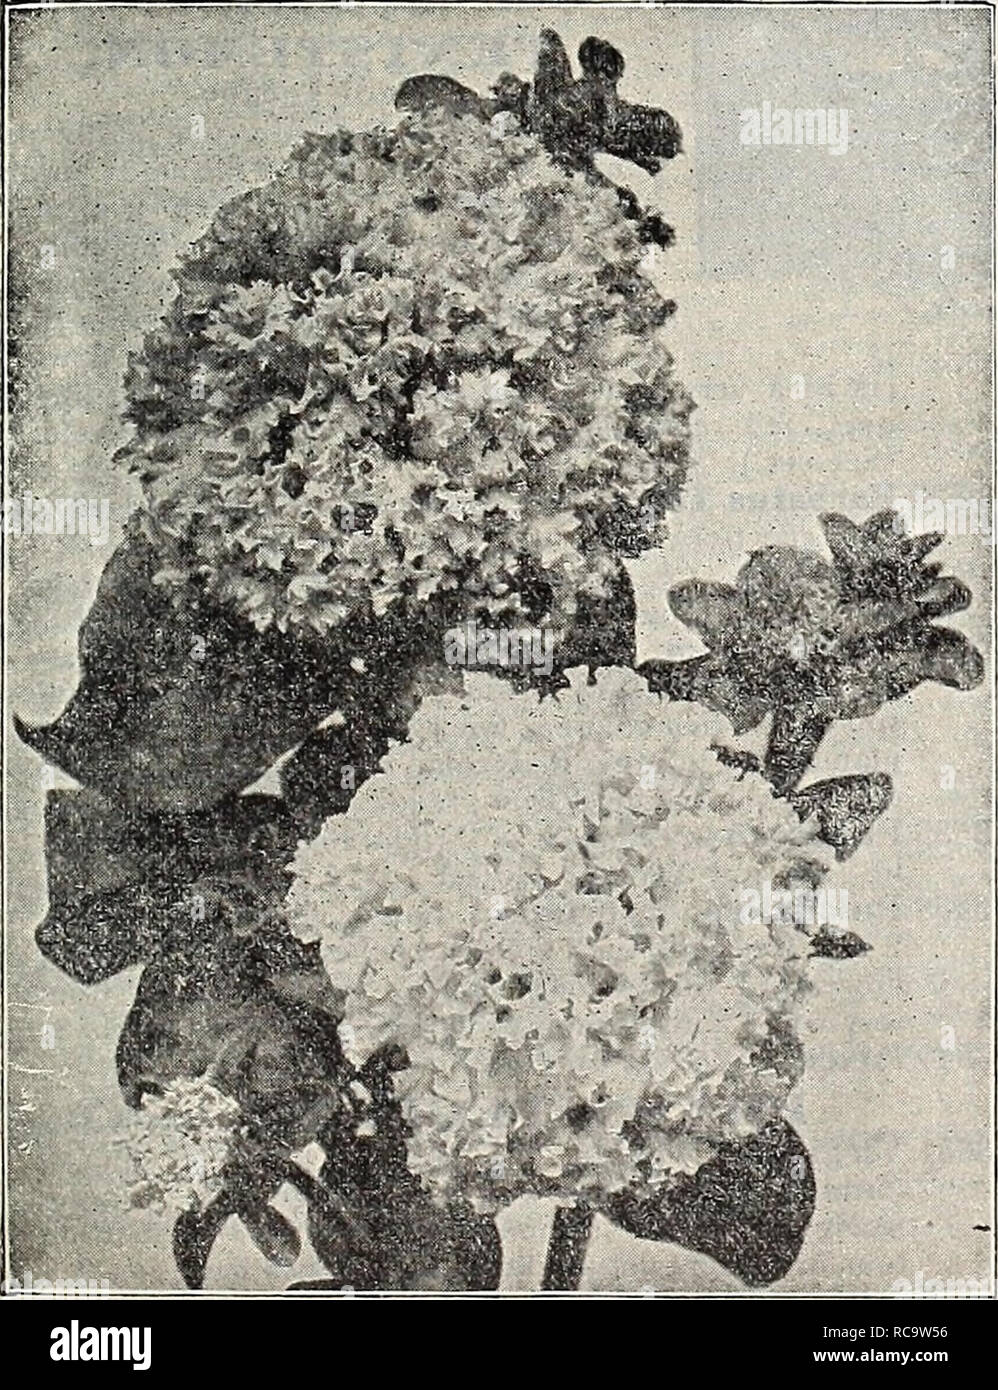 . Dreer's 1907 garden book. Seeds Catalogs; Nursery stock Catalogs; Gardening Equipment and supplies Catalogs; Flowers Seeds Catalogs; Vegetables Seeds Catalogs; Fruit Seeds Catalogs. PE -.'/. Dreer's Superb Large-Flowering Double-Fringed Petunias. Dreer's Superb Large-Flowering Single-Fringed Petunias. SINGLE VARIETIES. A'ole what we say in refer- ence to saving the weaker seed- lings of the double -flowering varieties ; the same is true in a measure of the single sorts. PER PKT. 3580 Dreer's Superb Large - Flowering Fringed. Our own sa ing from finest flowers, of very large size and beautif Stock Photo